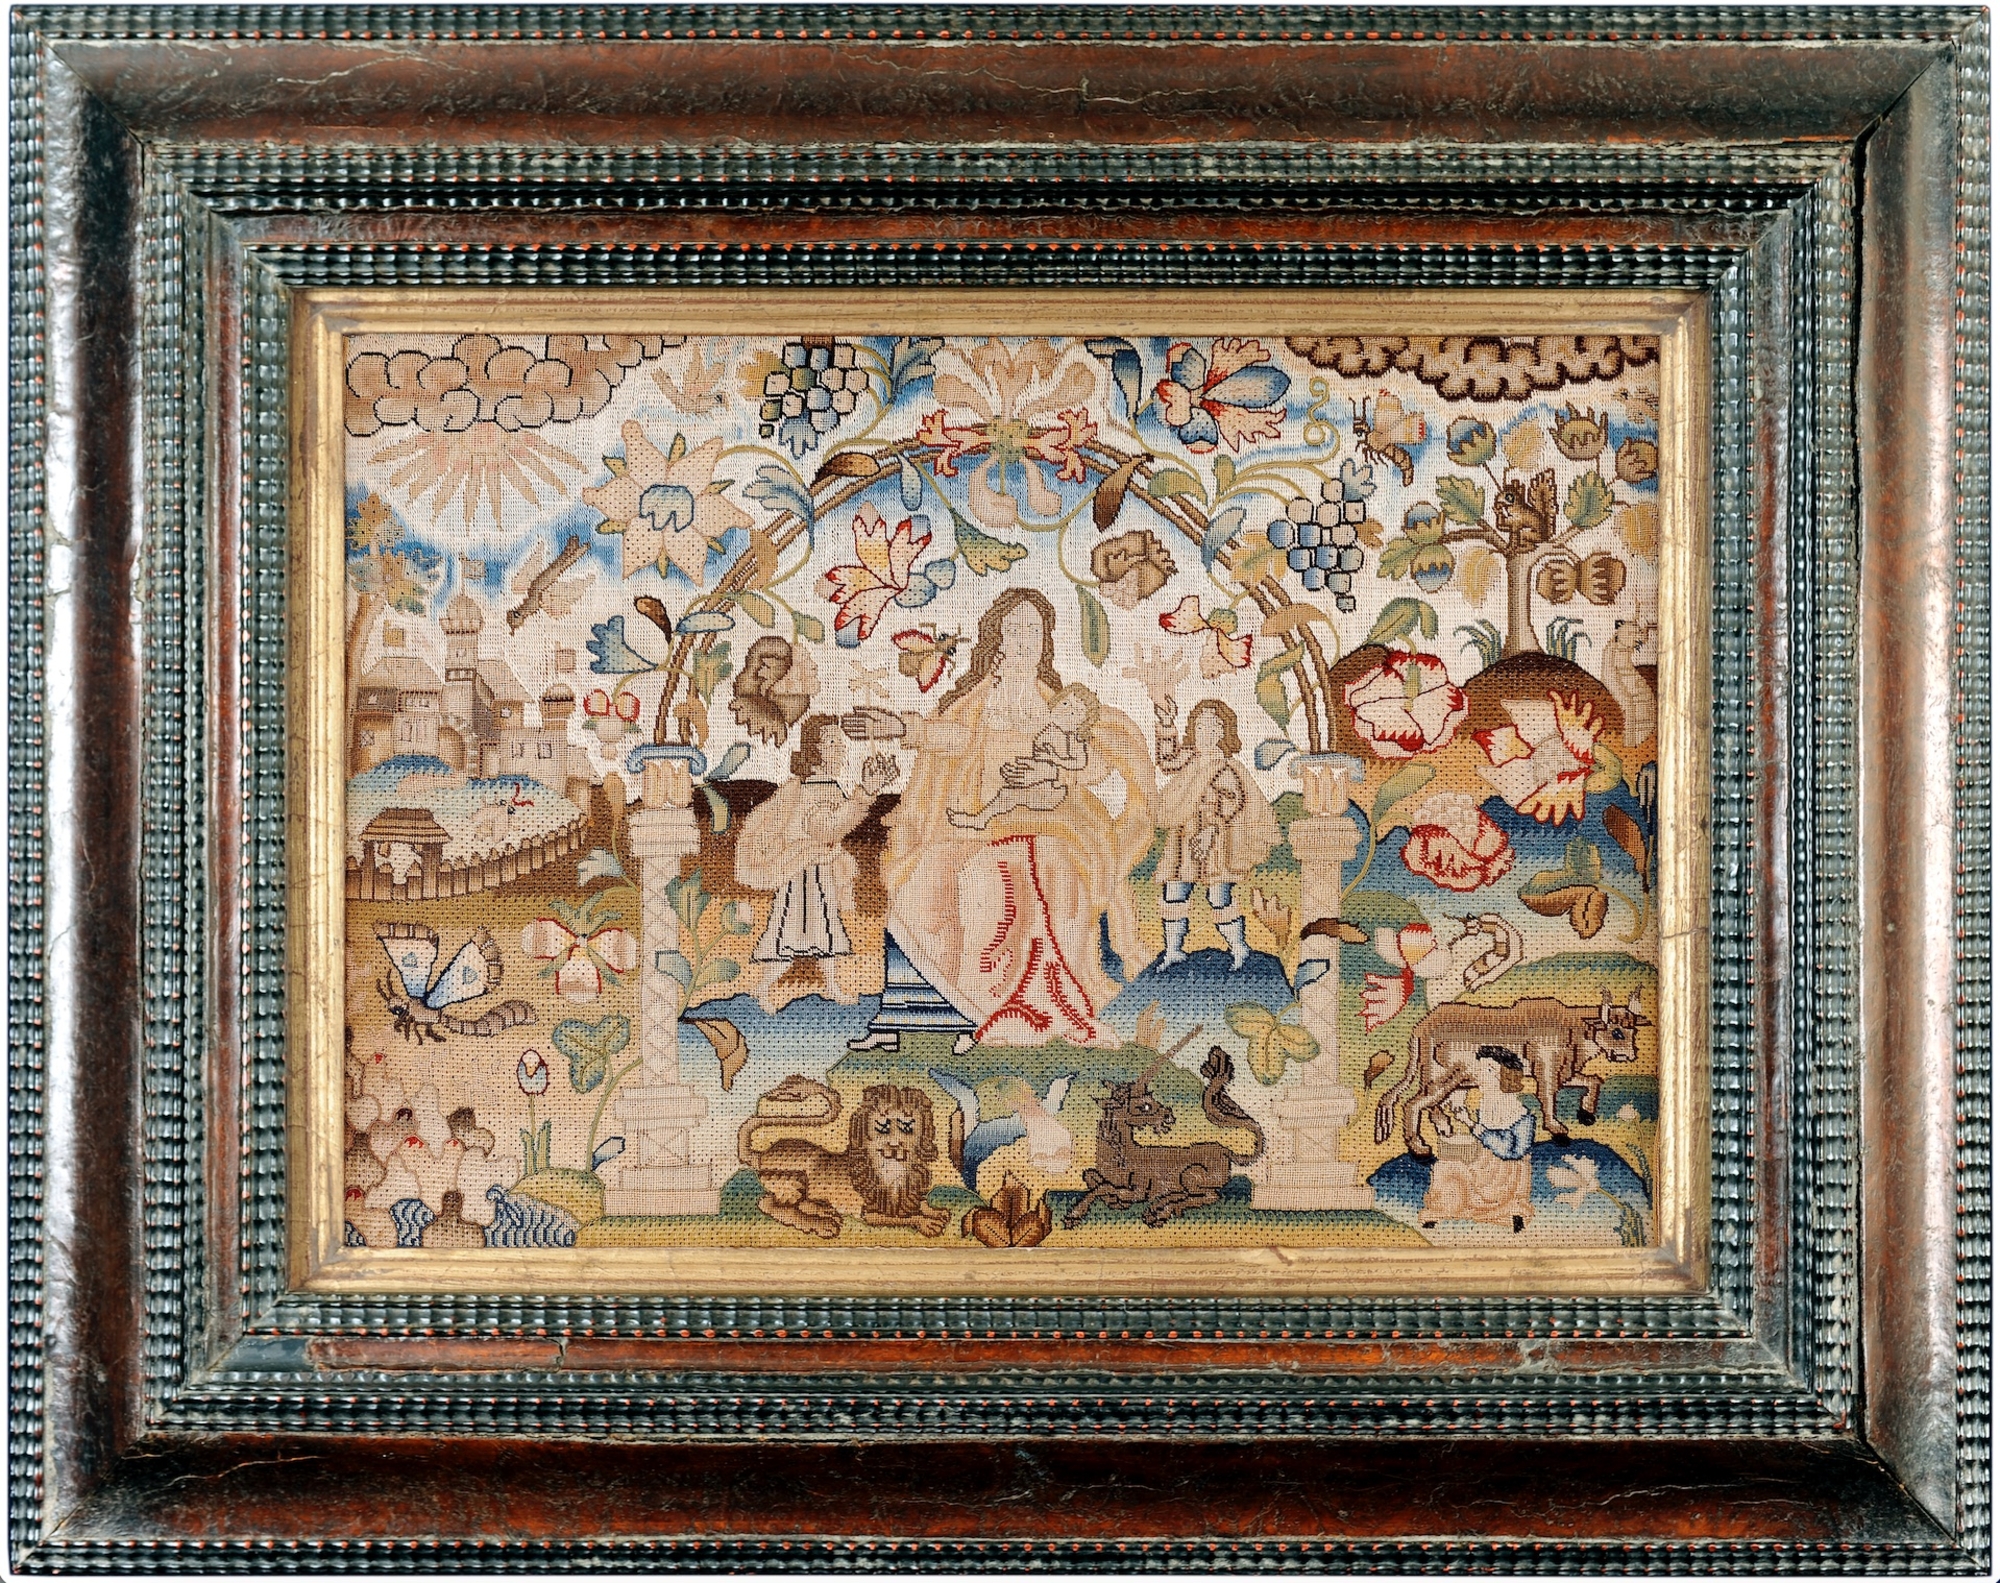 Panel Likely from the Perwich School, Circa 1650-1660